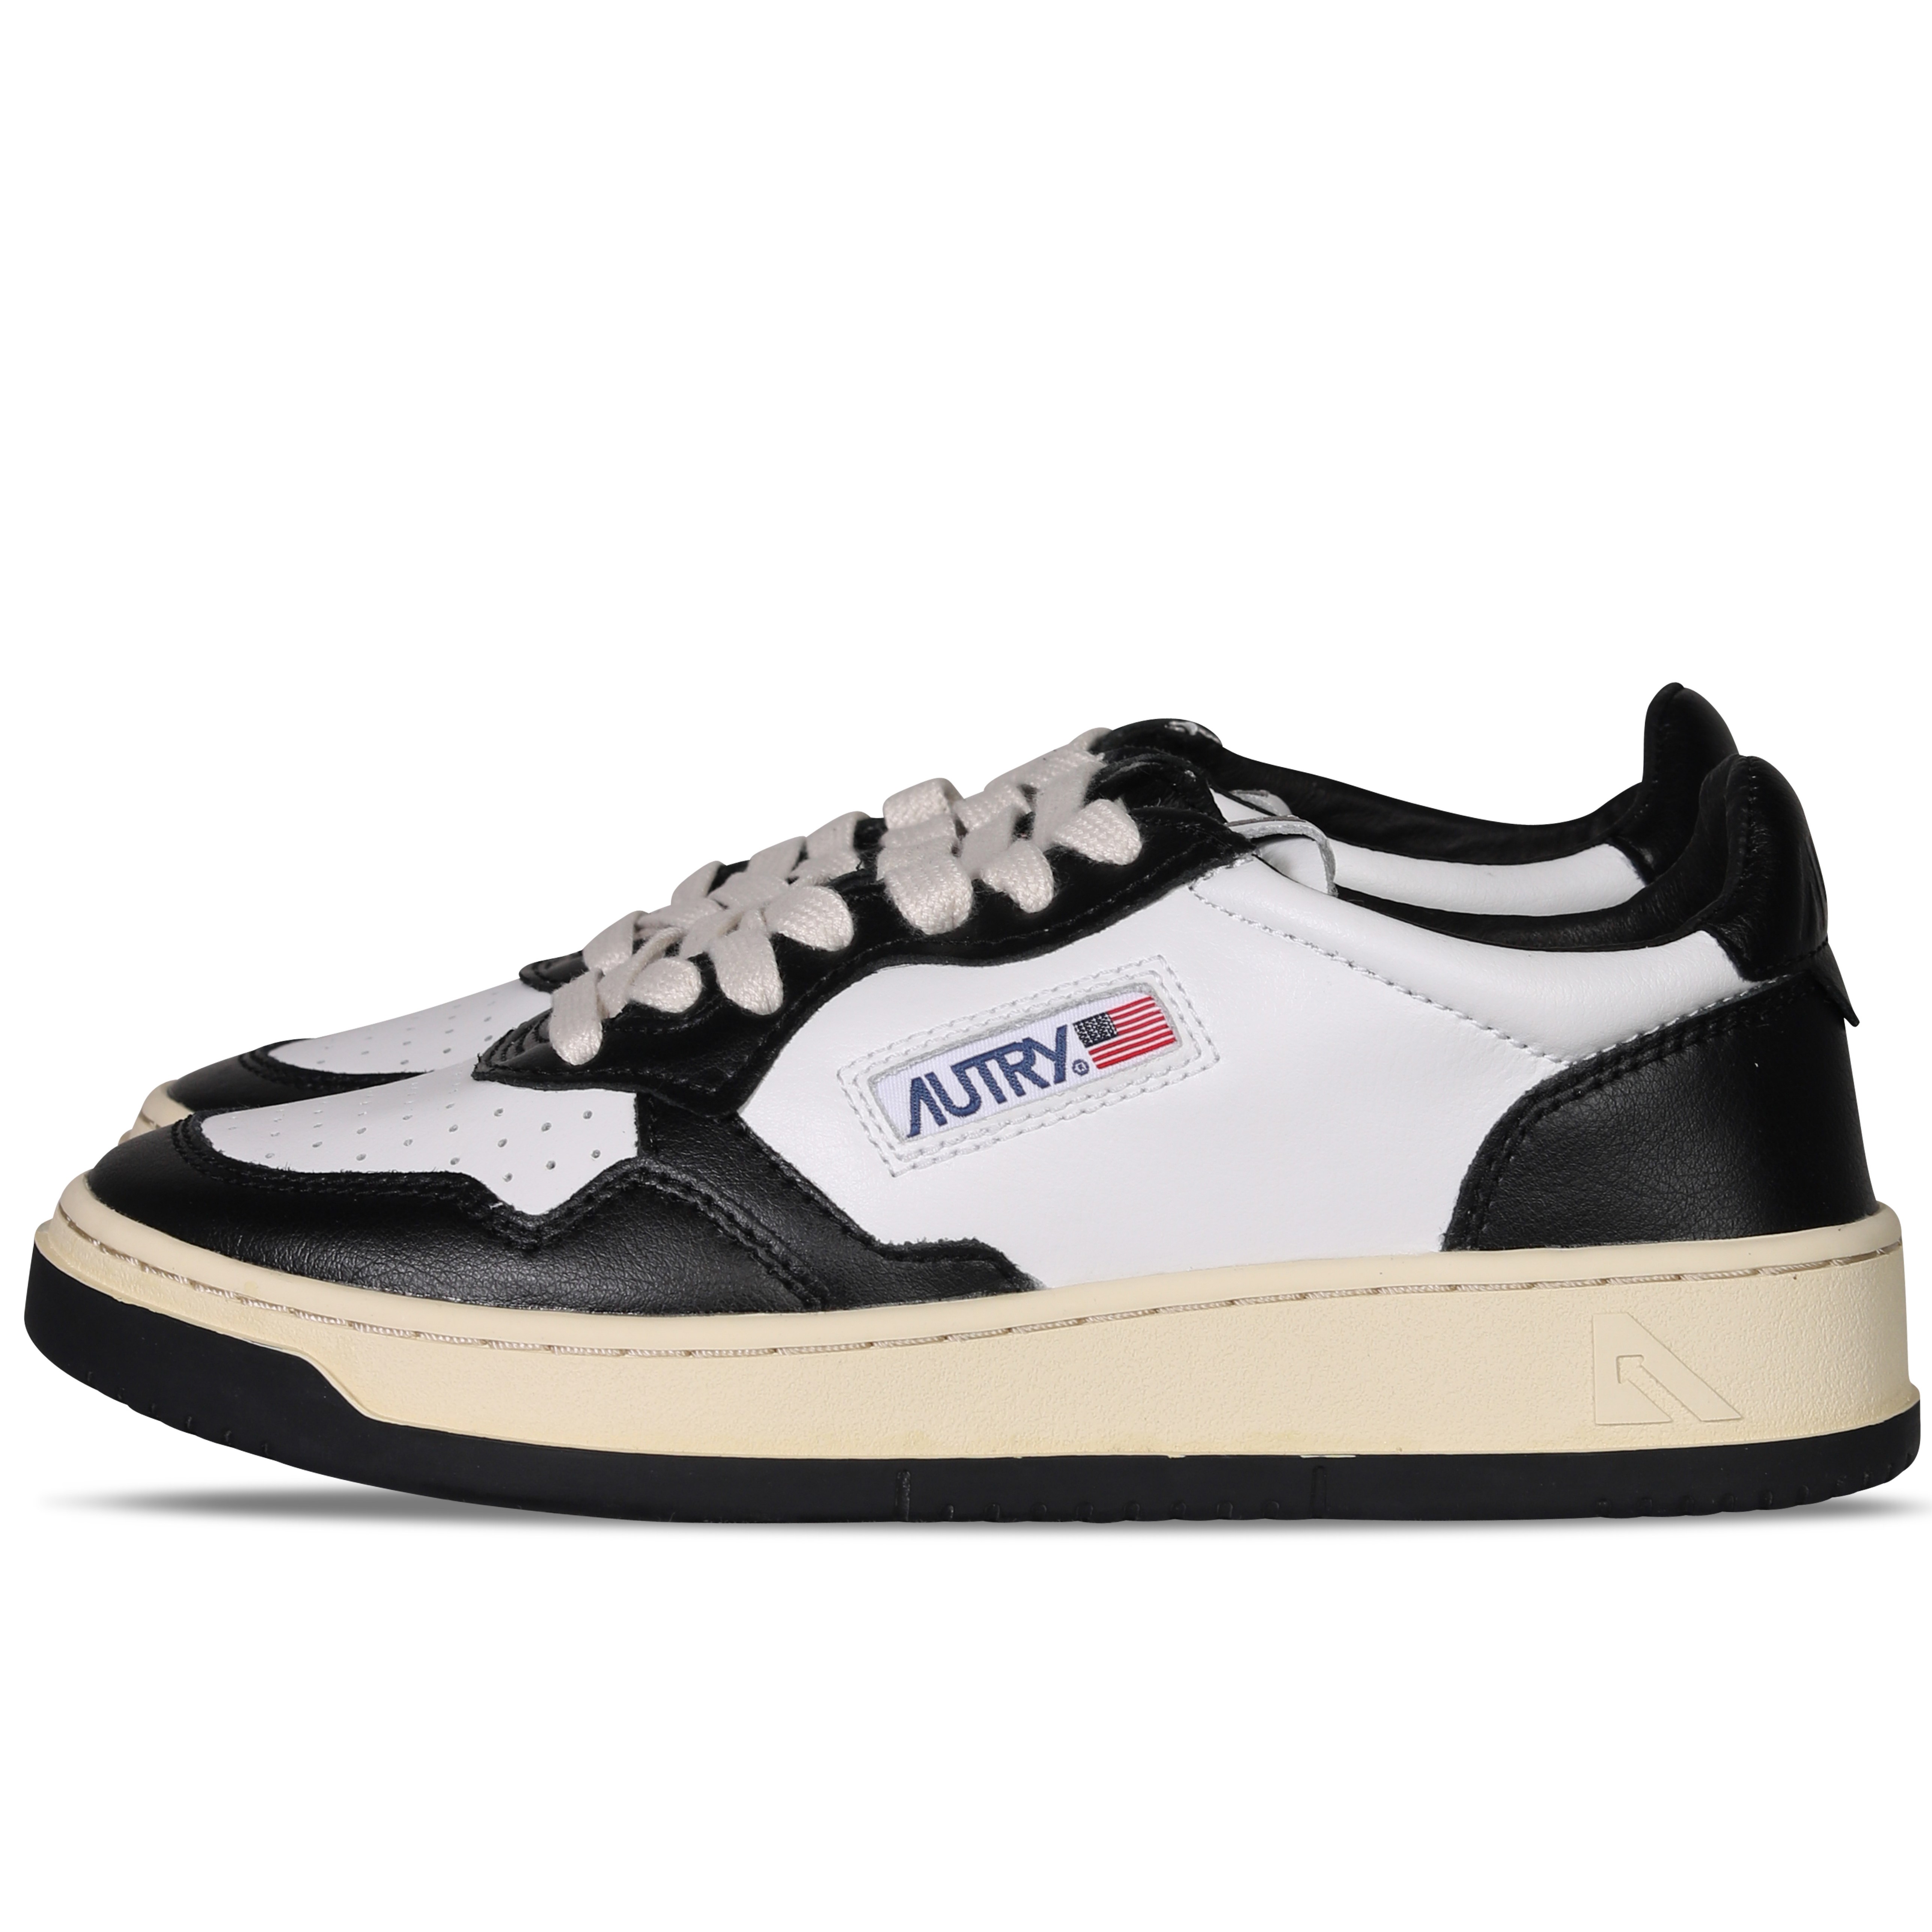 Autry Action Shoes Low Sneaker White/Black